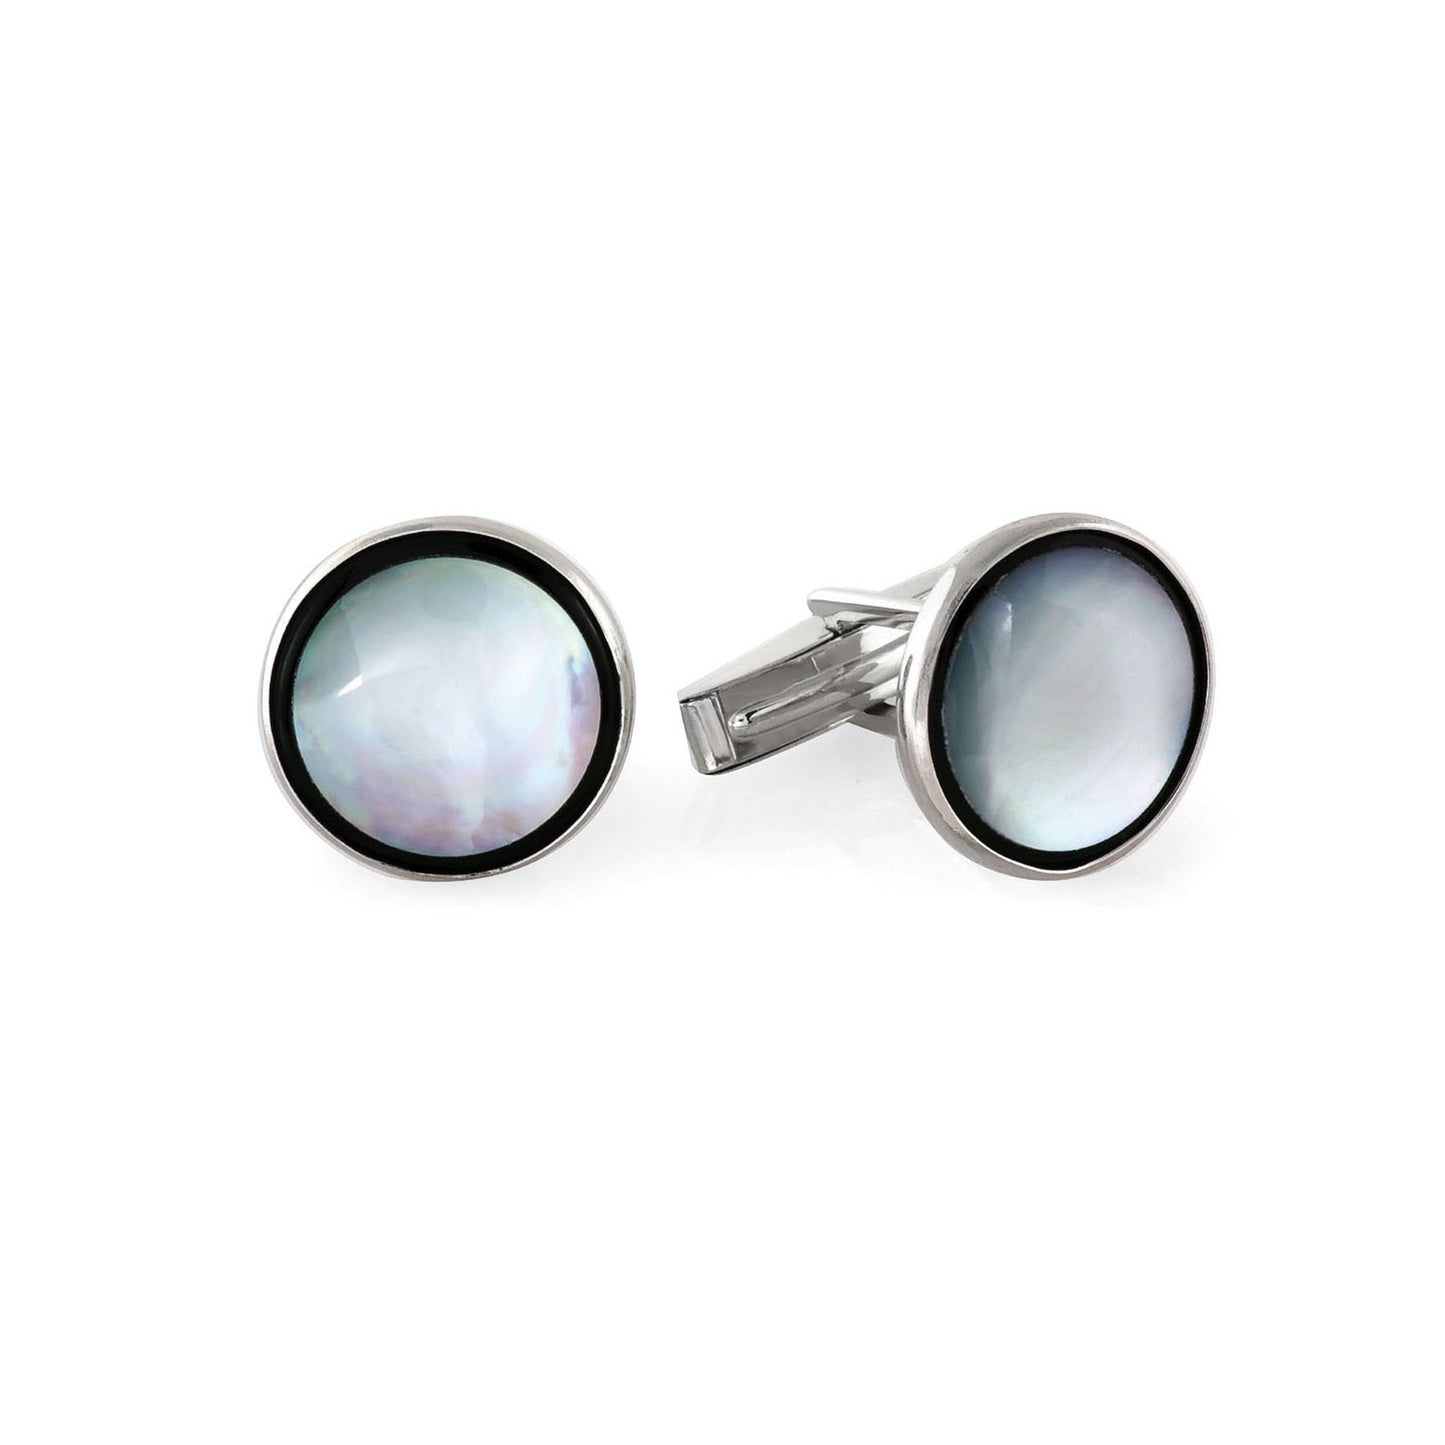 A sterling silver round cufflinks with mother of pearl & onyx trim displayed on a neutral white background.